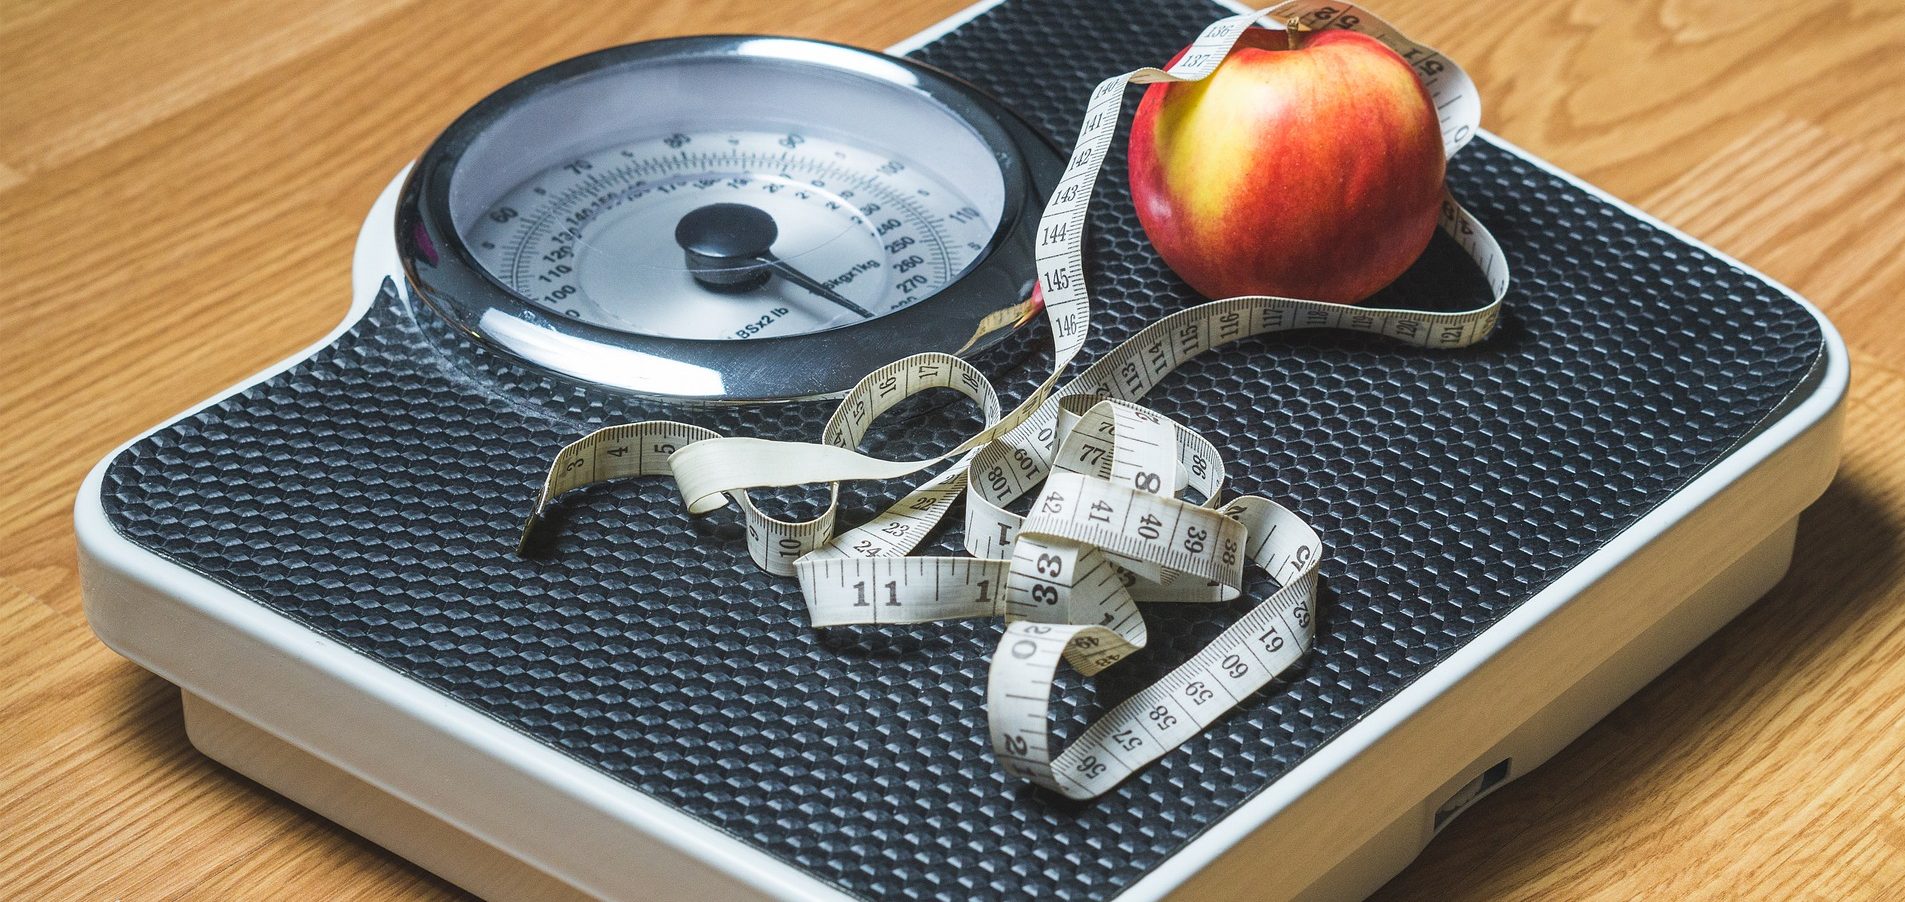 Things you need to know trying to lose weight